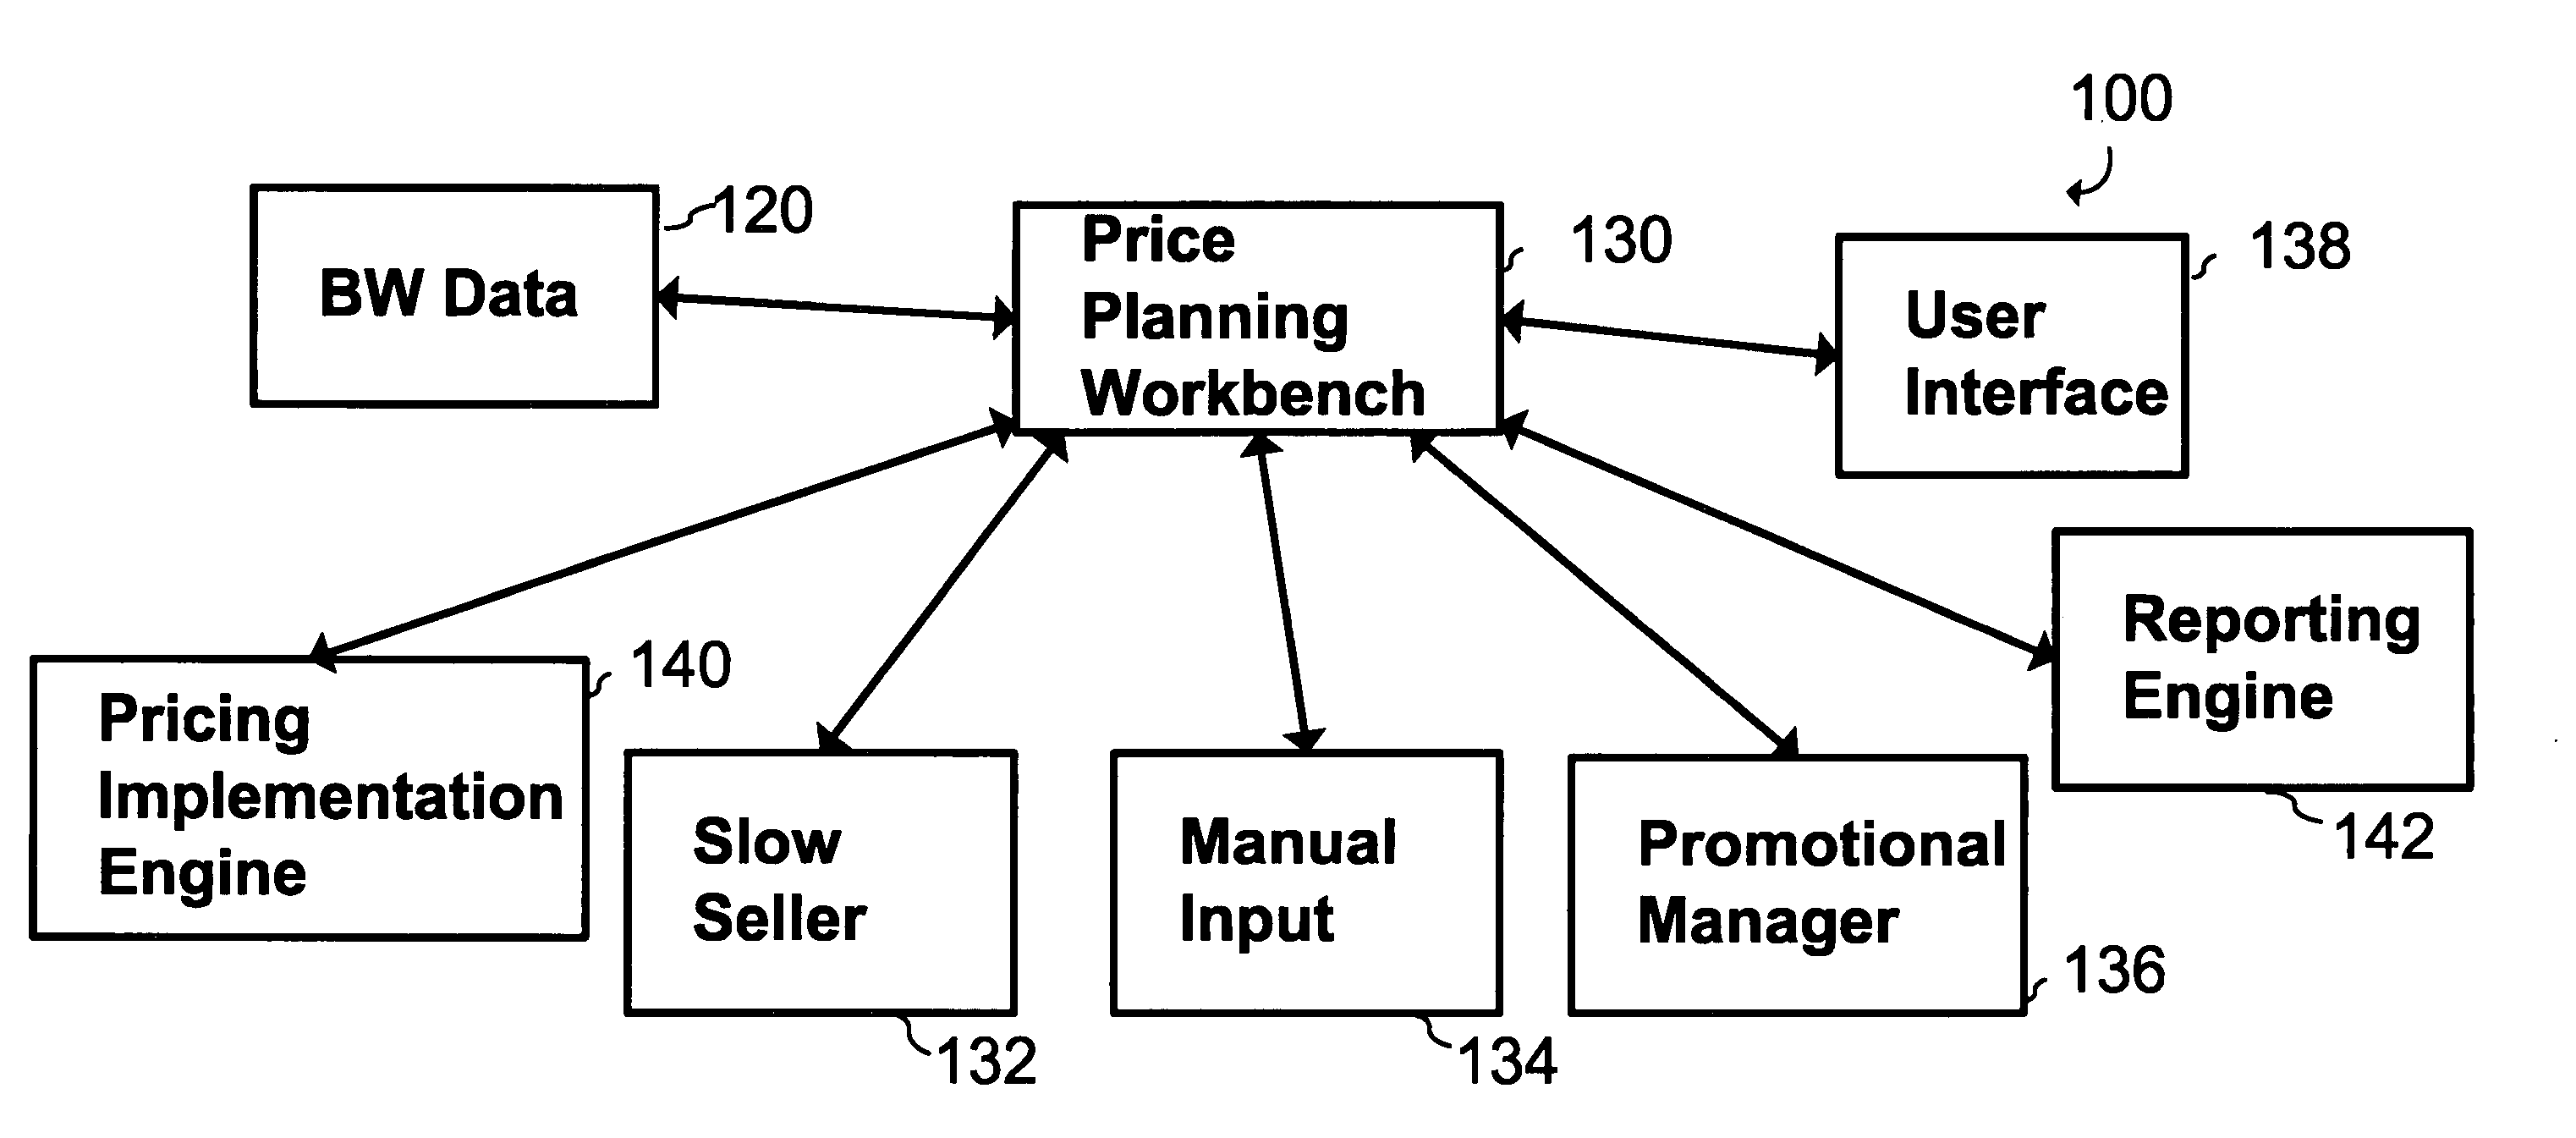 Organizational settings for a price planning workbench